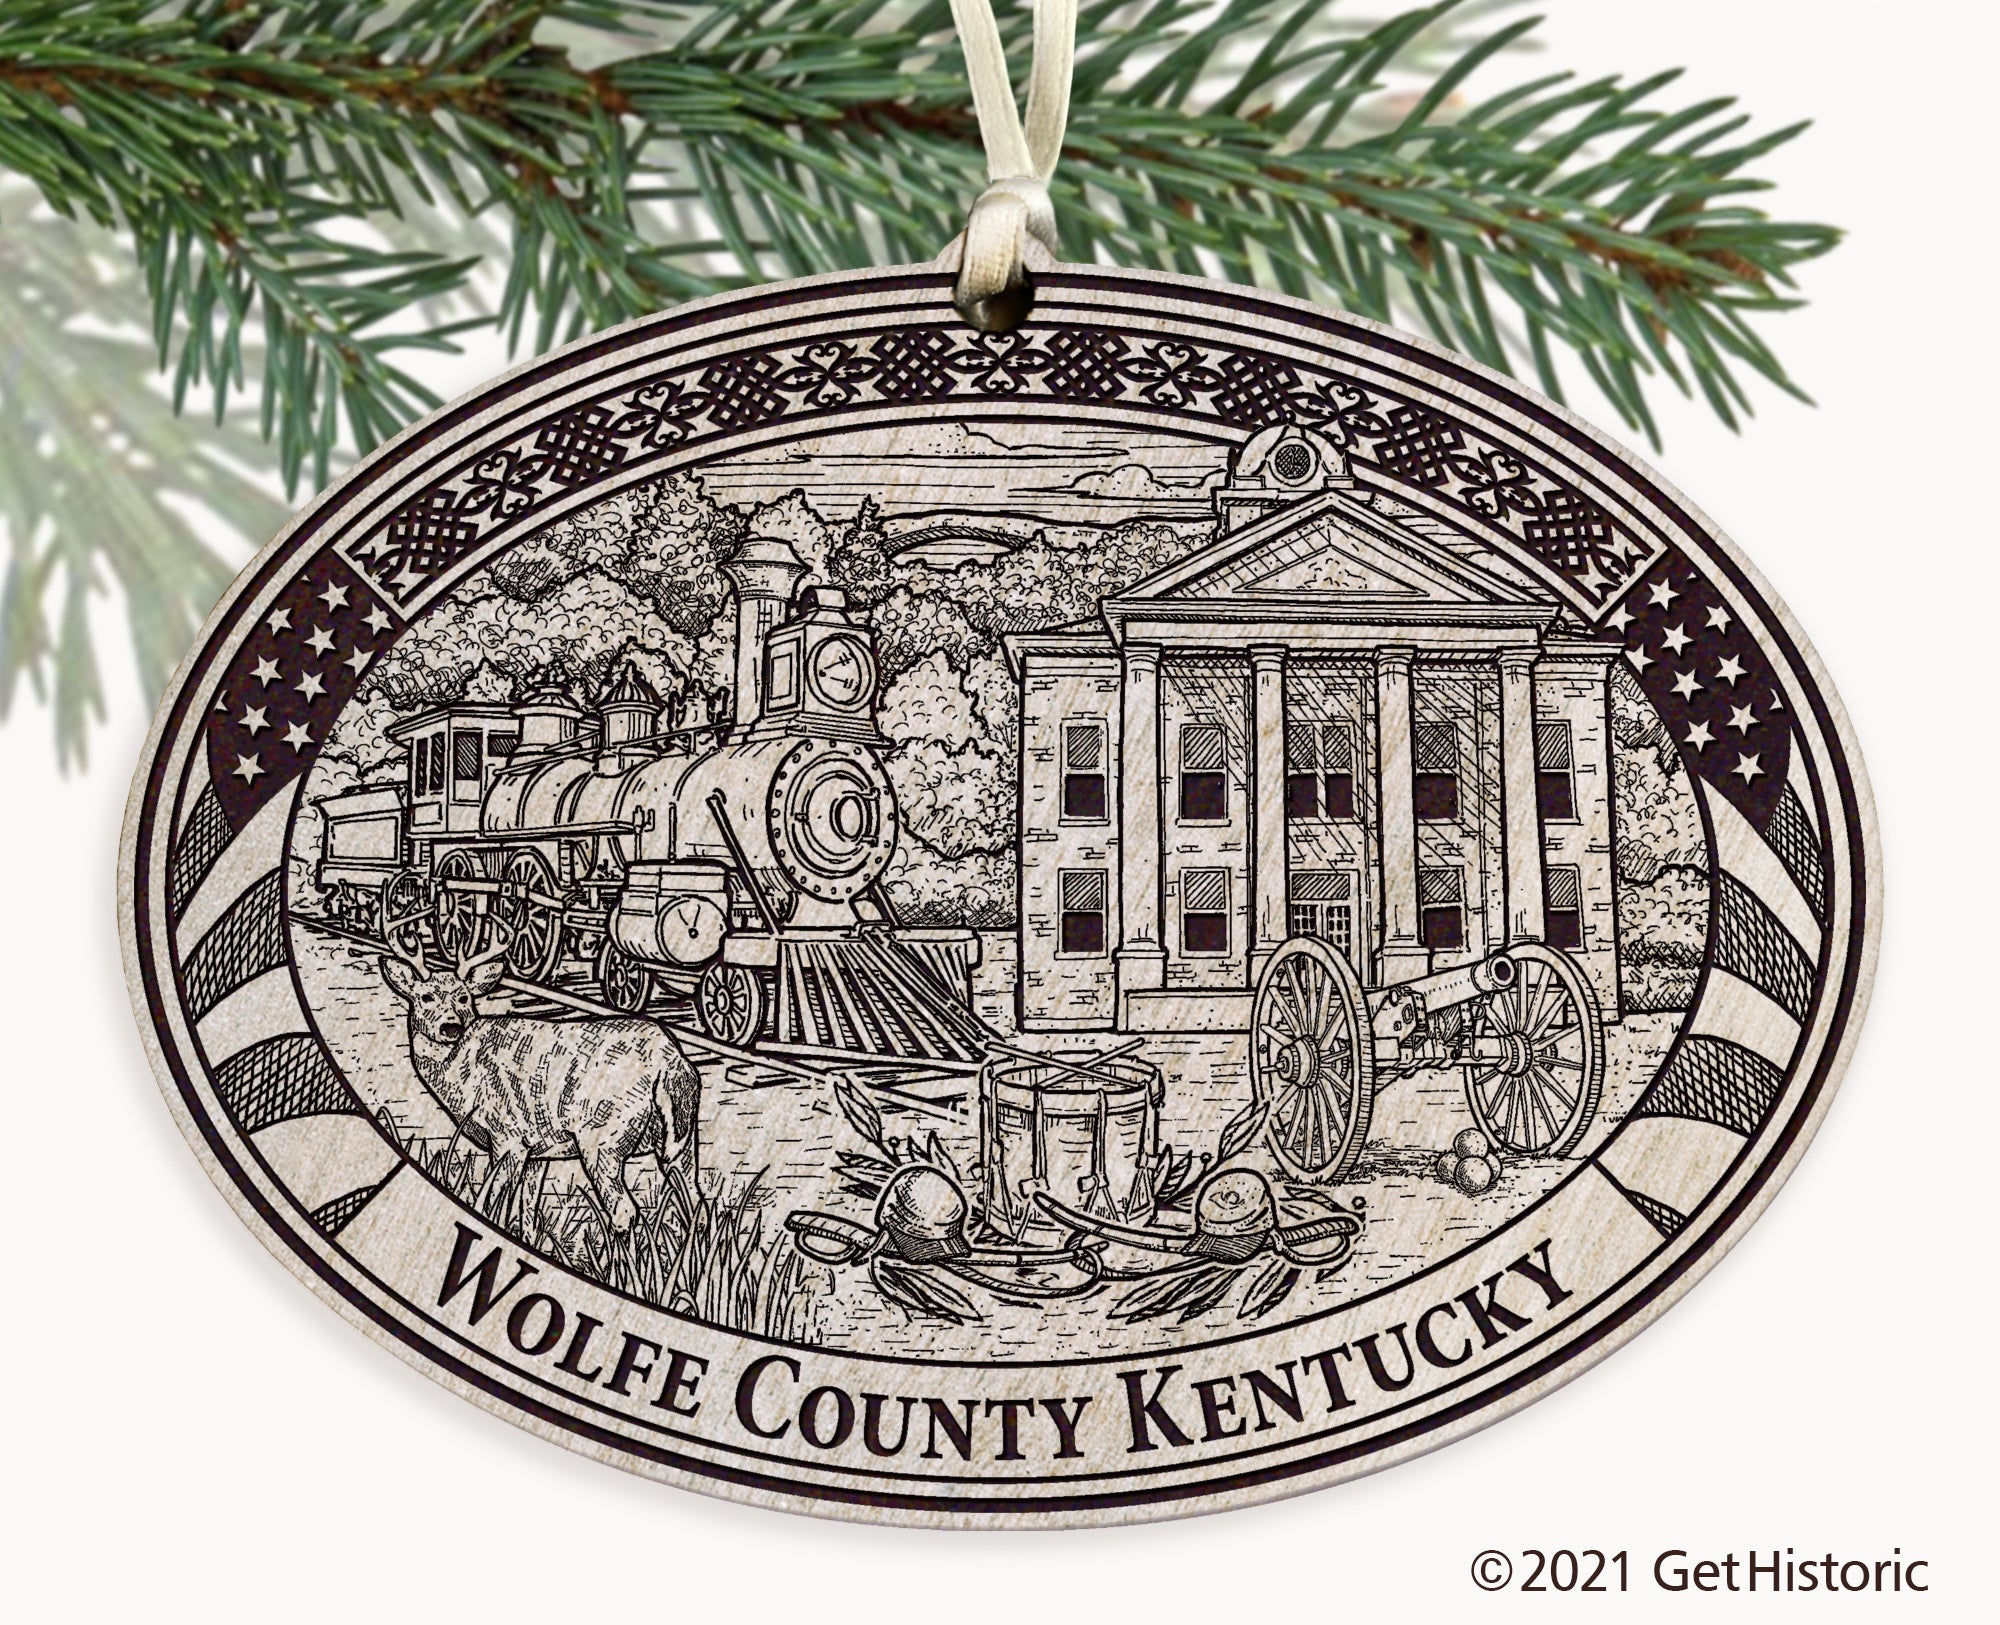 Wolfe County Kentucky Engraved Ornament